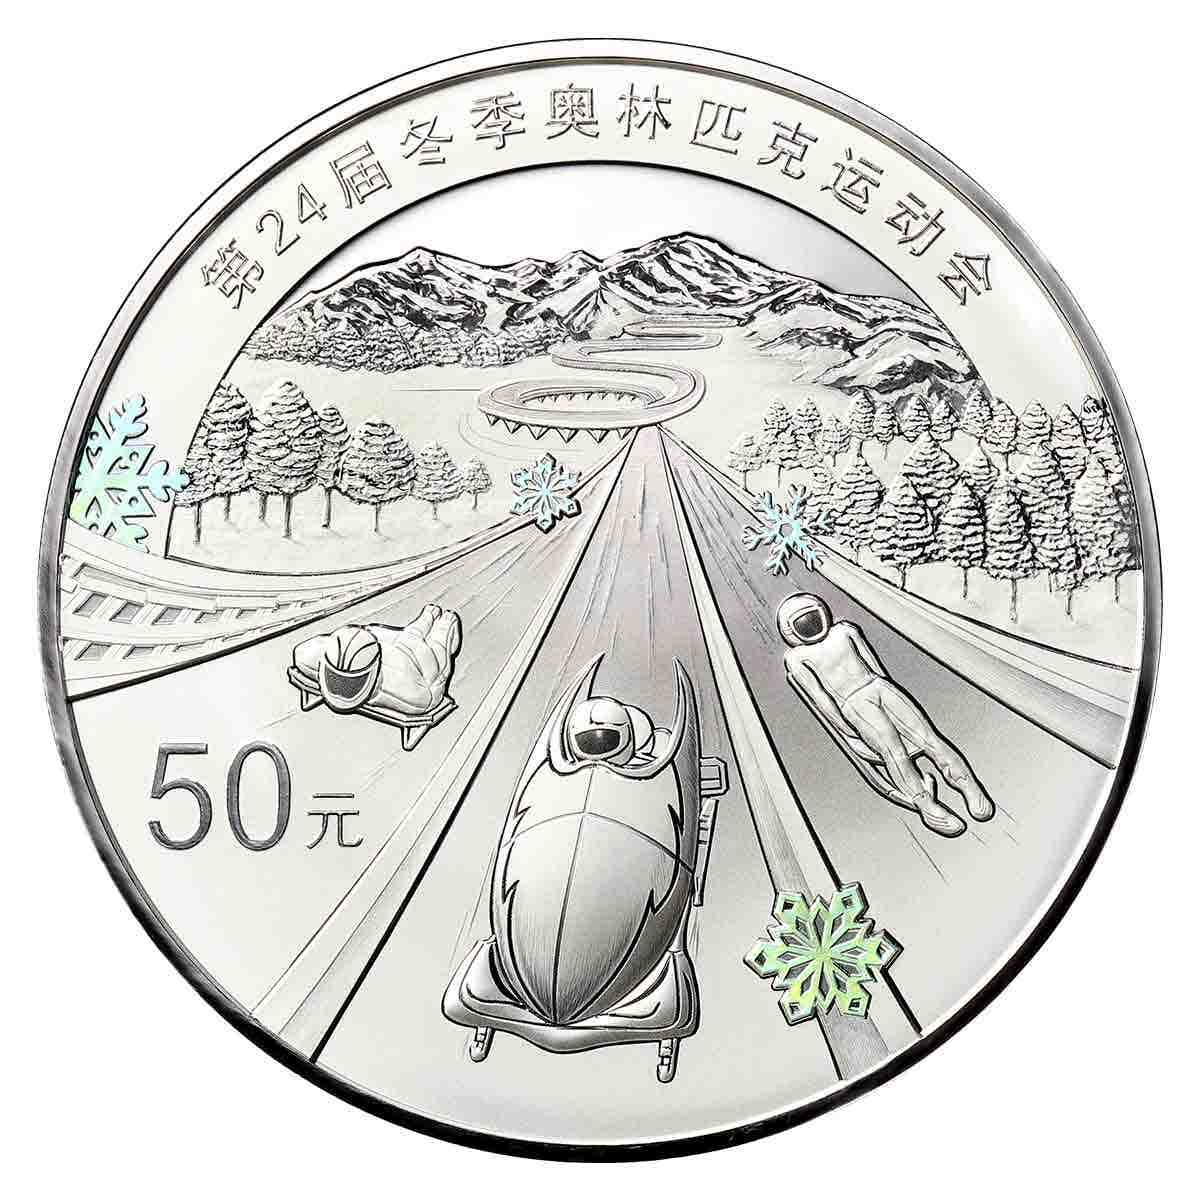 Olympic Winter Games Beijing 2022 50 Yuan Silver Proof Holographic Coin